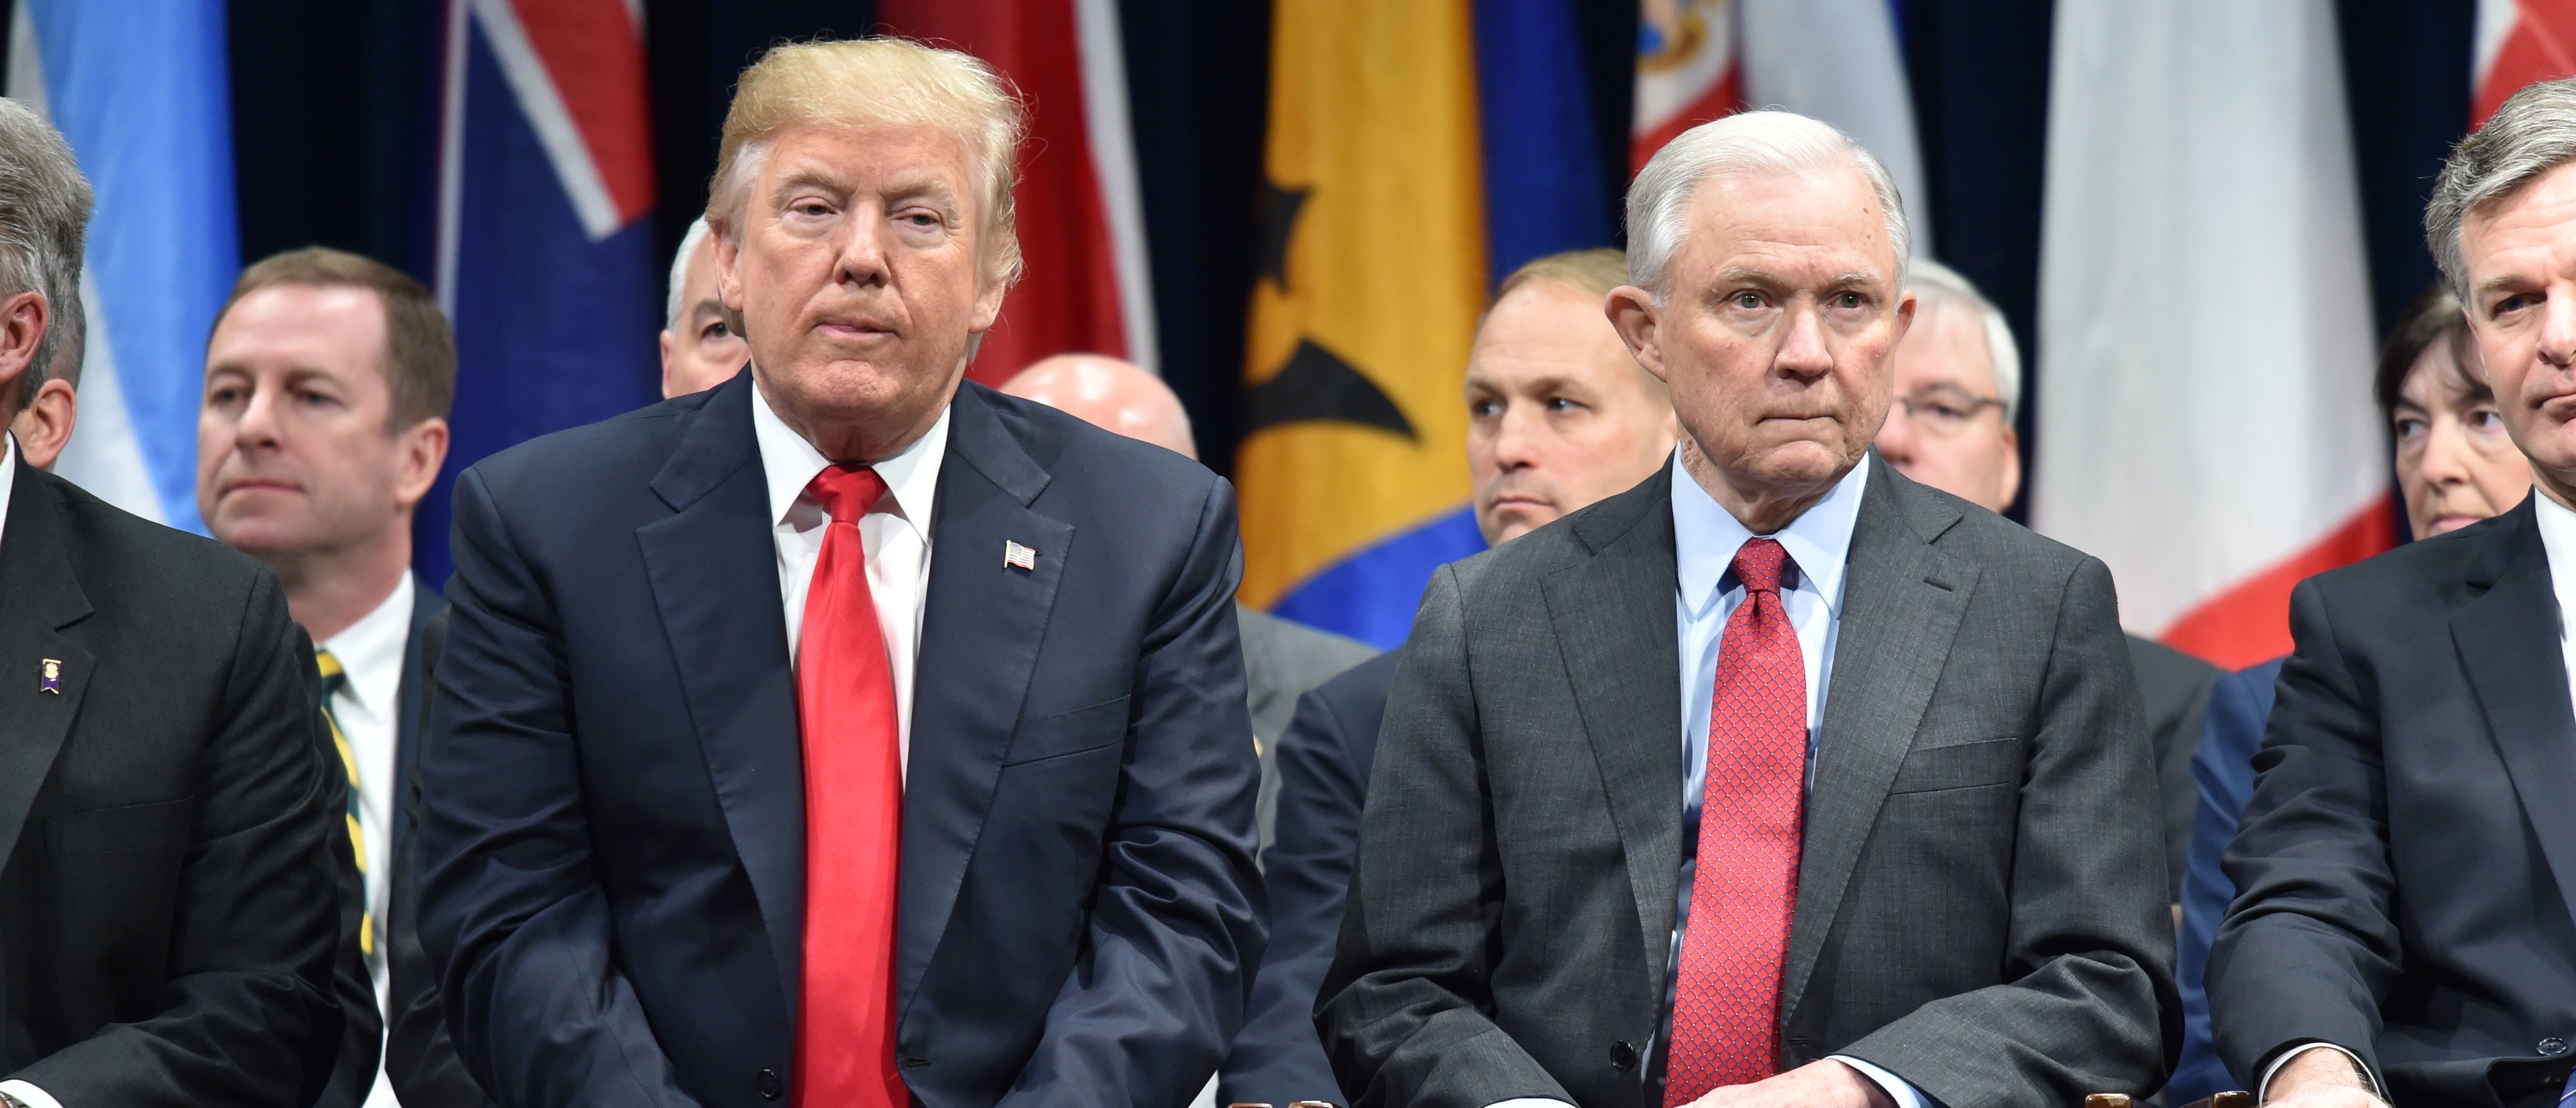 President Donald Trump sits with Attorney General Jeff Sessions on December 15, 2017 in Quantico, Virginia, before participating in the FBI National Academy graduation ceremony. (Photo: NICHOLAS KAMM/AFP/Getty Images)